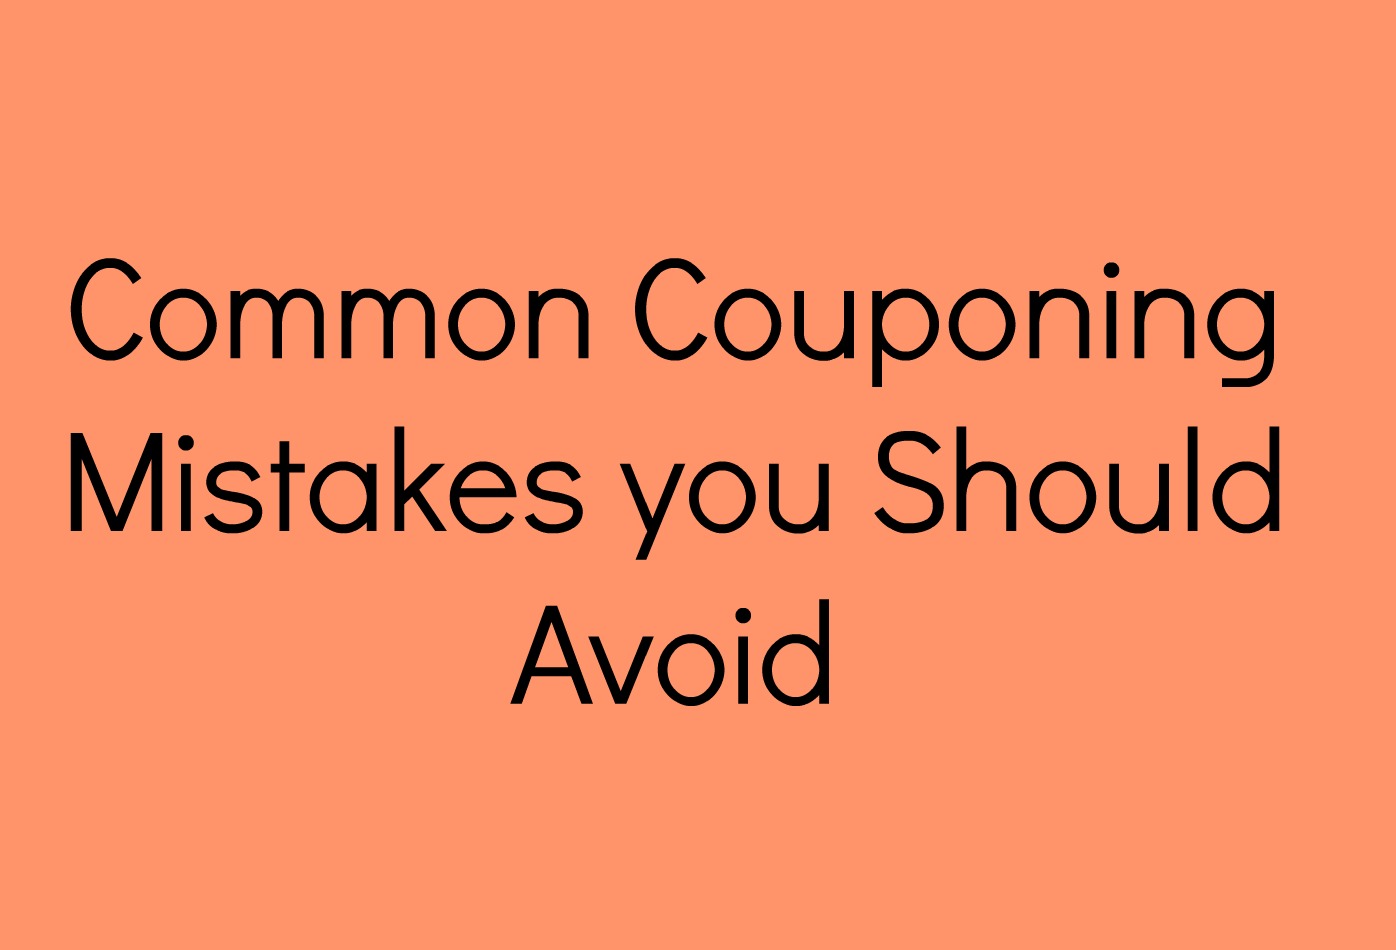 Common Couponing Mistakes you Should Avoid